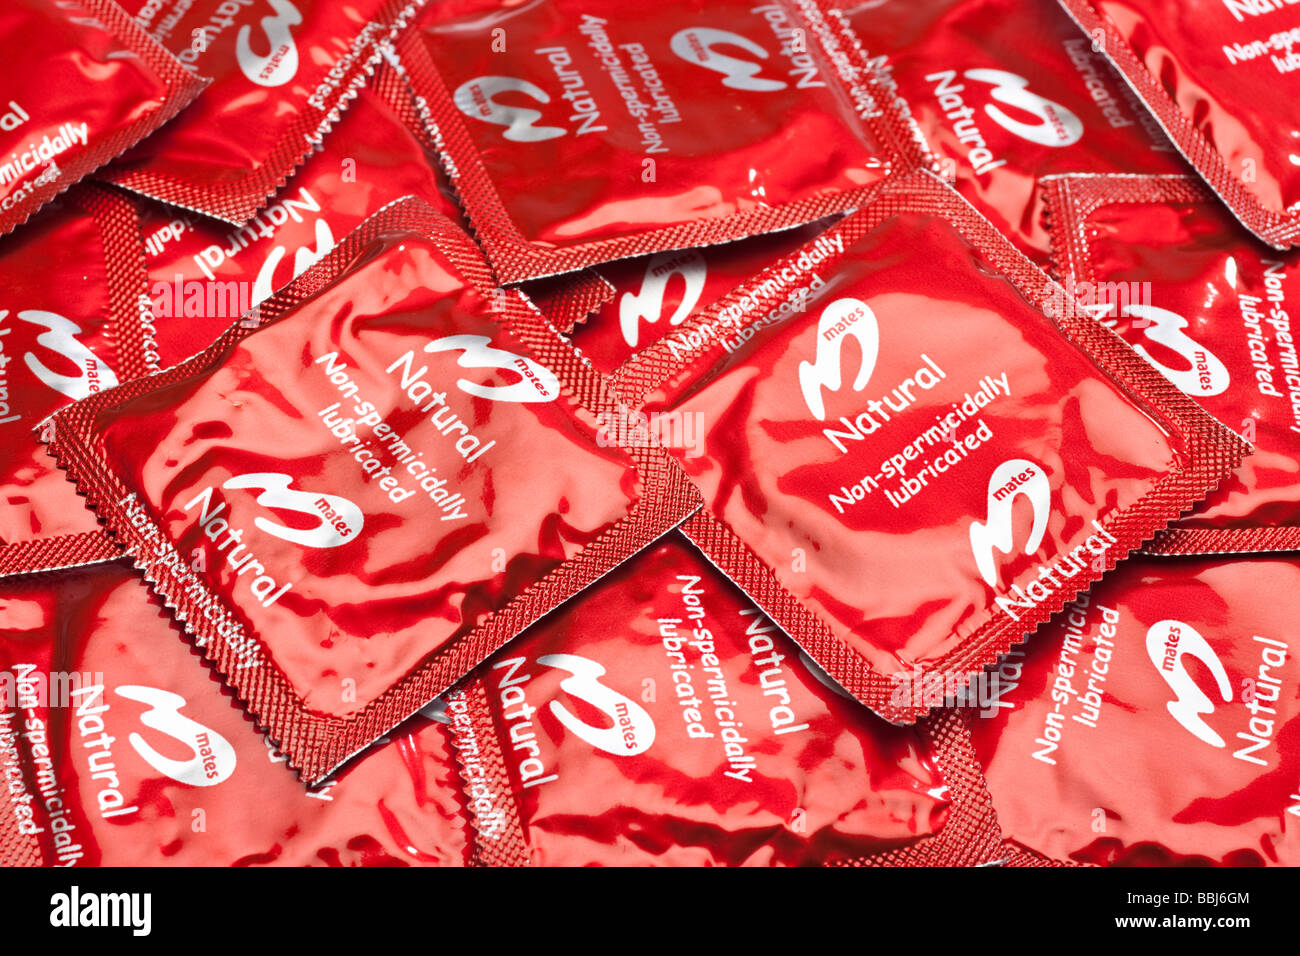 Condoms in red foil packets close up Stock Photo